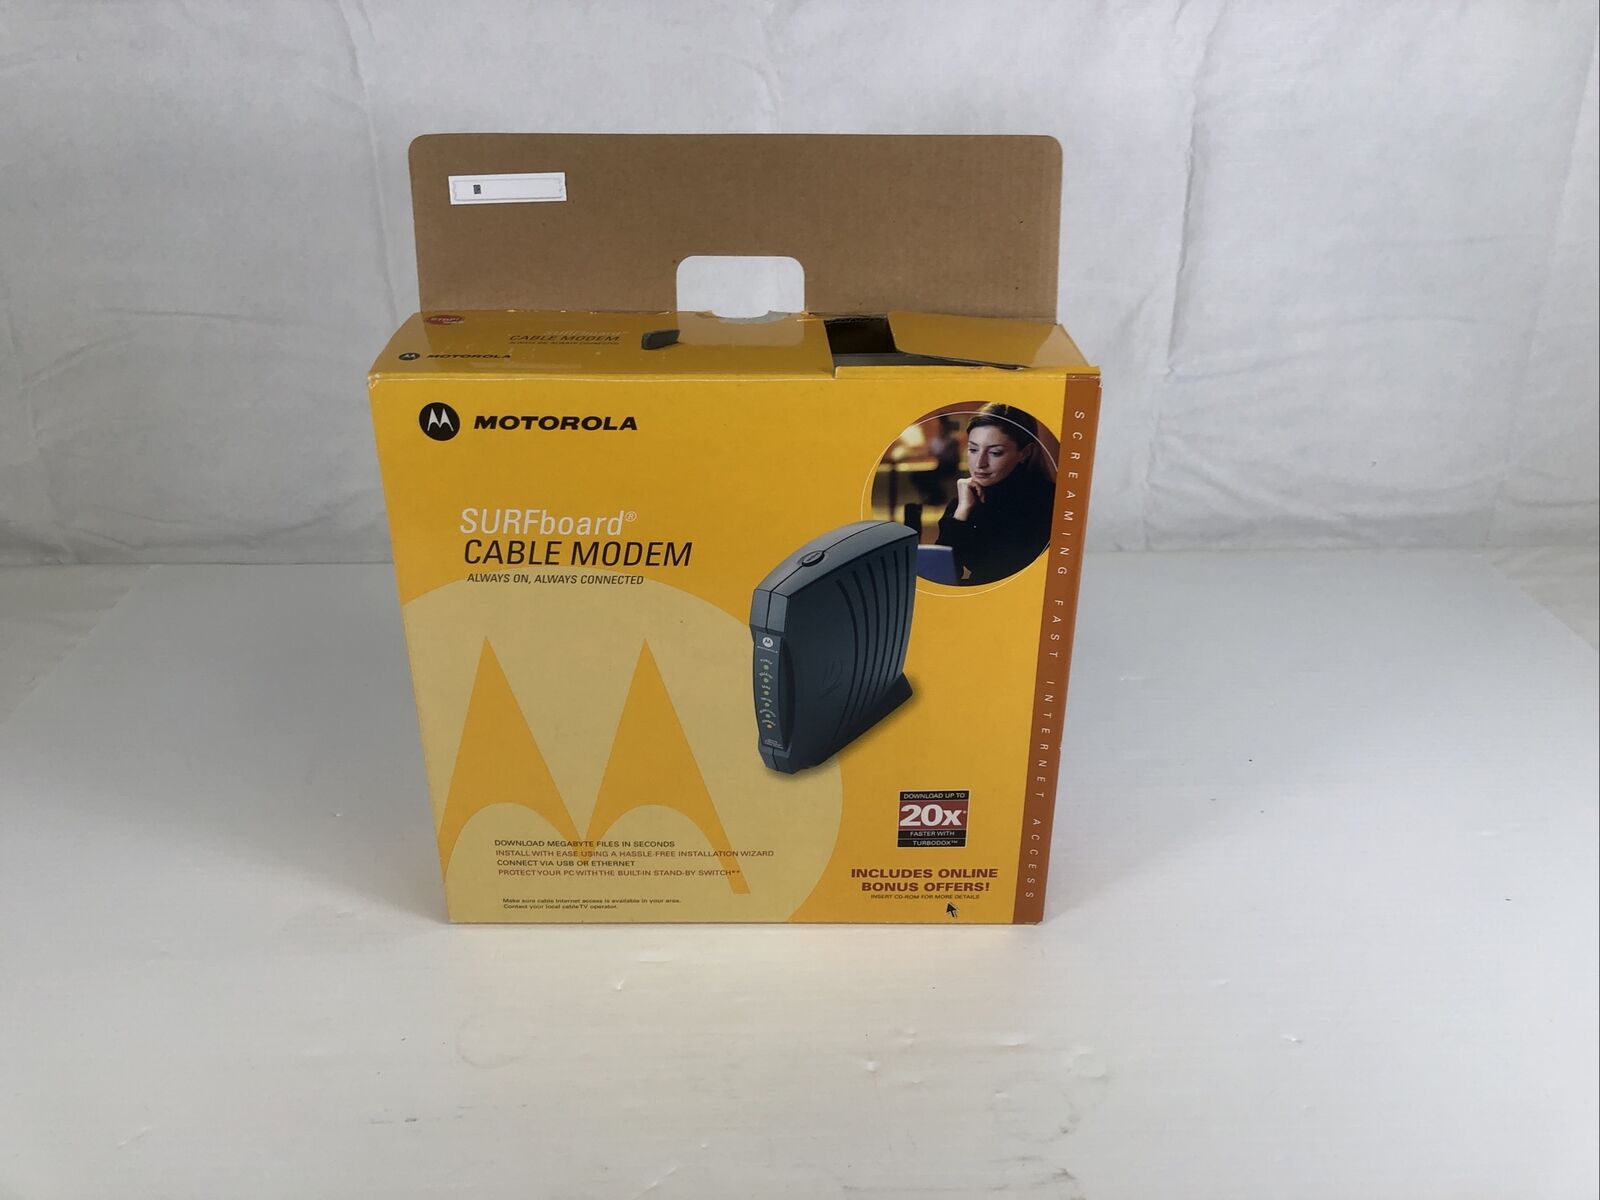 Motorola SURFboard SB5120 (505788-006-00) 38.91 Mbps With Adapter